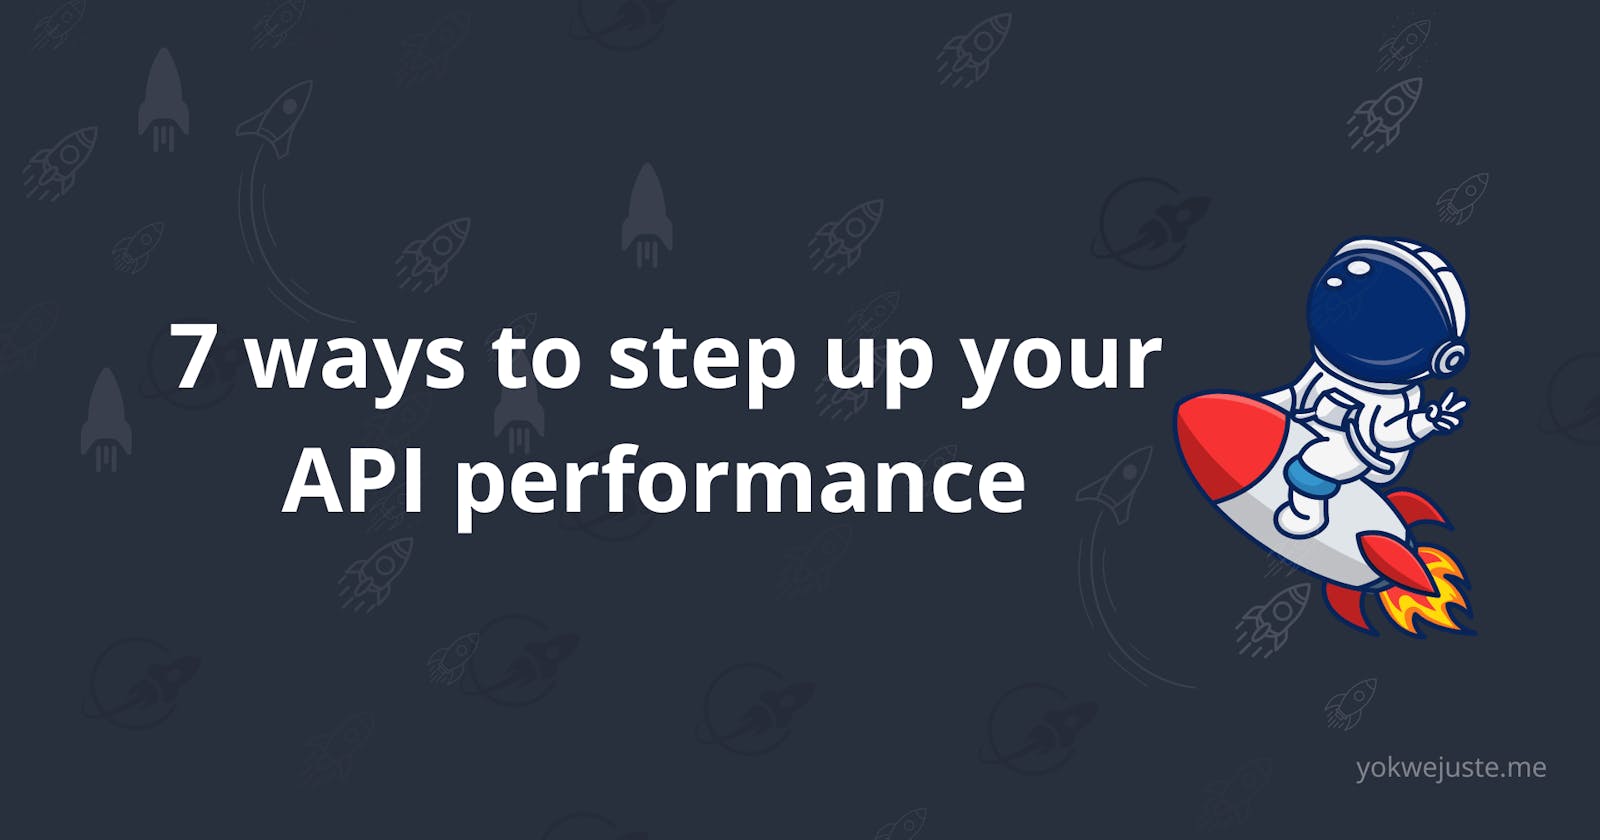 7 ways to step up your API performance.